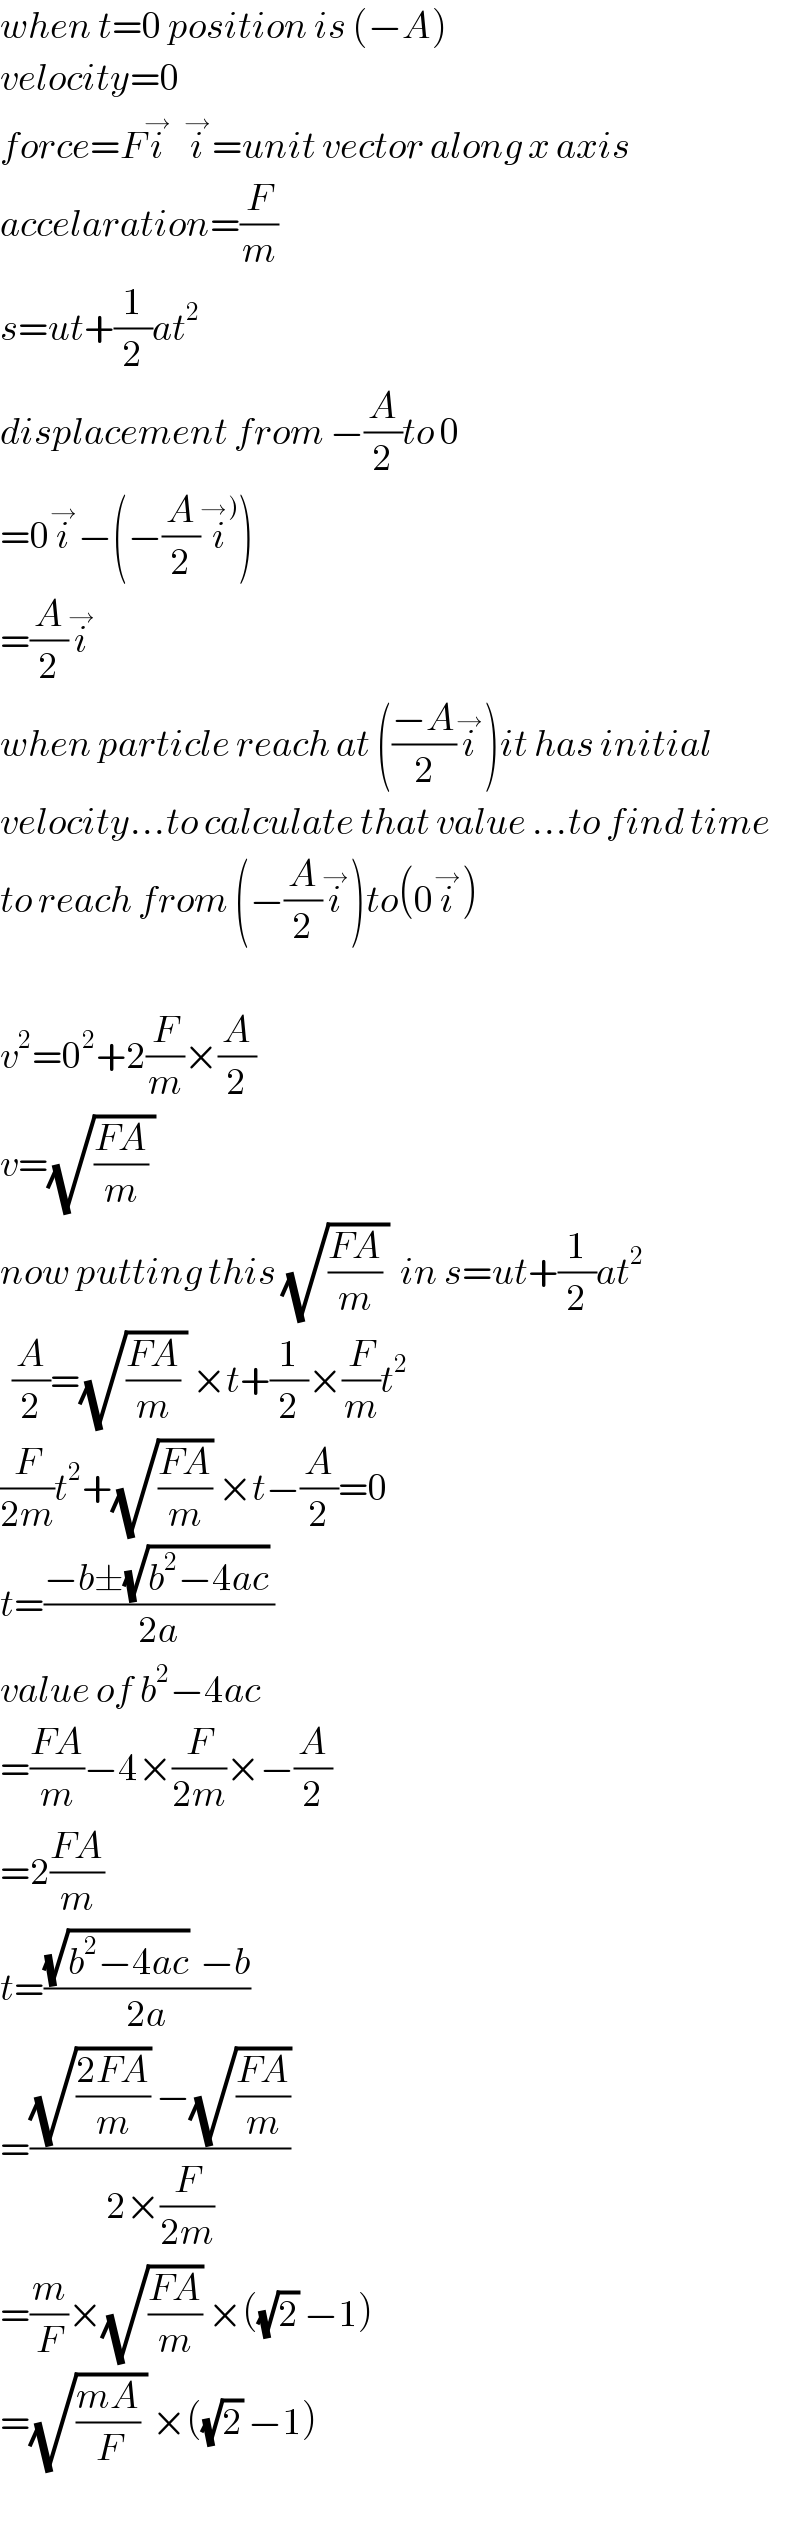 when t=0 position is (−A)  velocity=0  force=Fi^→   i^→ =unit vector along x axis  accelaration=(F/m)  s=ut+(1/2)at^2   displacement from −(A/2)to 0  =0i^→ −(−(A/2)i^(→)) )  =(A/2)i^→   when particle reach at (((−A)/2)i^→ )it has initial  velocity...to calculate that value ...to find time  to reach from (−(A/2)i^→ )to(0i^→ )    v^2 =0^2 +2(F/m)×(A/2)  v=(√(((FA)/m) ))  now putting this (√(((FA)/m) ))  in s=ut+(1/2)at^2     (A/2)=(√(((FA)/m) )) ×t+(1/2)×(F/m)t^2   (F/(2m))t^2 +(√((FA)/m)) ×t−(A/2)=0  t=((−b±(√(b^2 −4ac)) )/(2a))  value of b^2 −4ac  =((FA)/m)−4×(F/(2m))×−(A/2)  =2((FA)/m)  t=(((√(b^2 −4ac))  −b)/(2a))  =(((√((2FA)/m)) −(√((FA)/m)))/(2×(F/(2m))))  =(m/F)×(√((FA)/m)) ×((√2) −1)  =(√(((mA)/F) )) ×((√2) −1)  